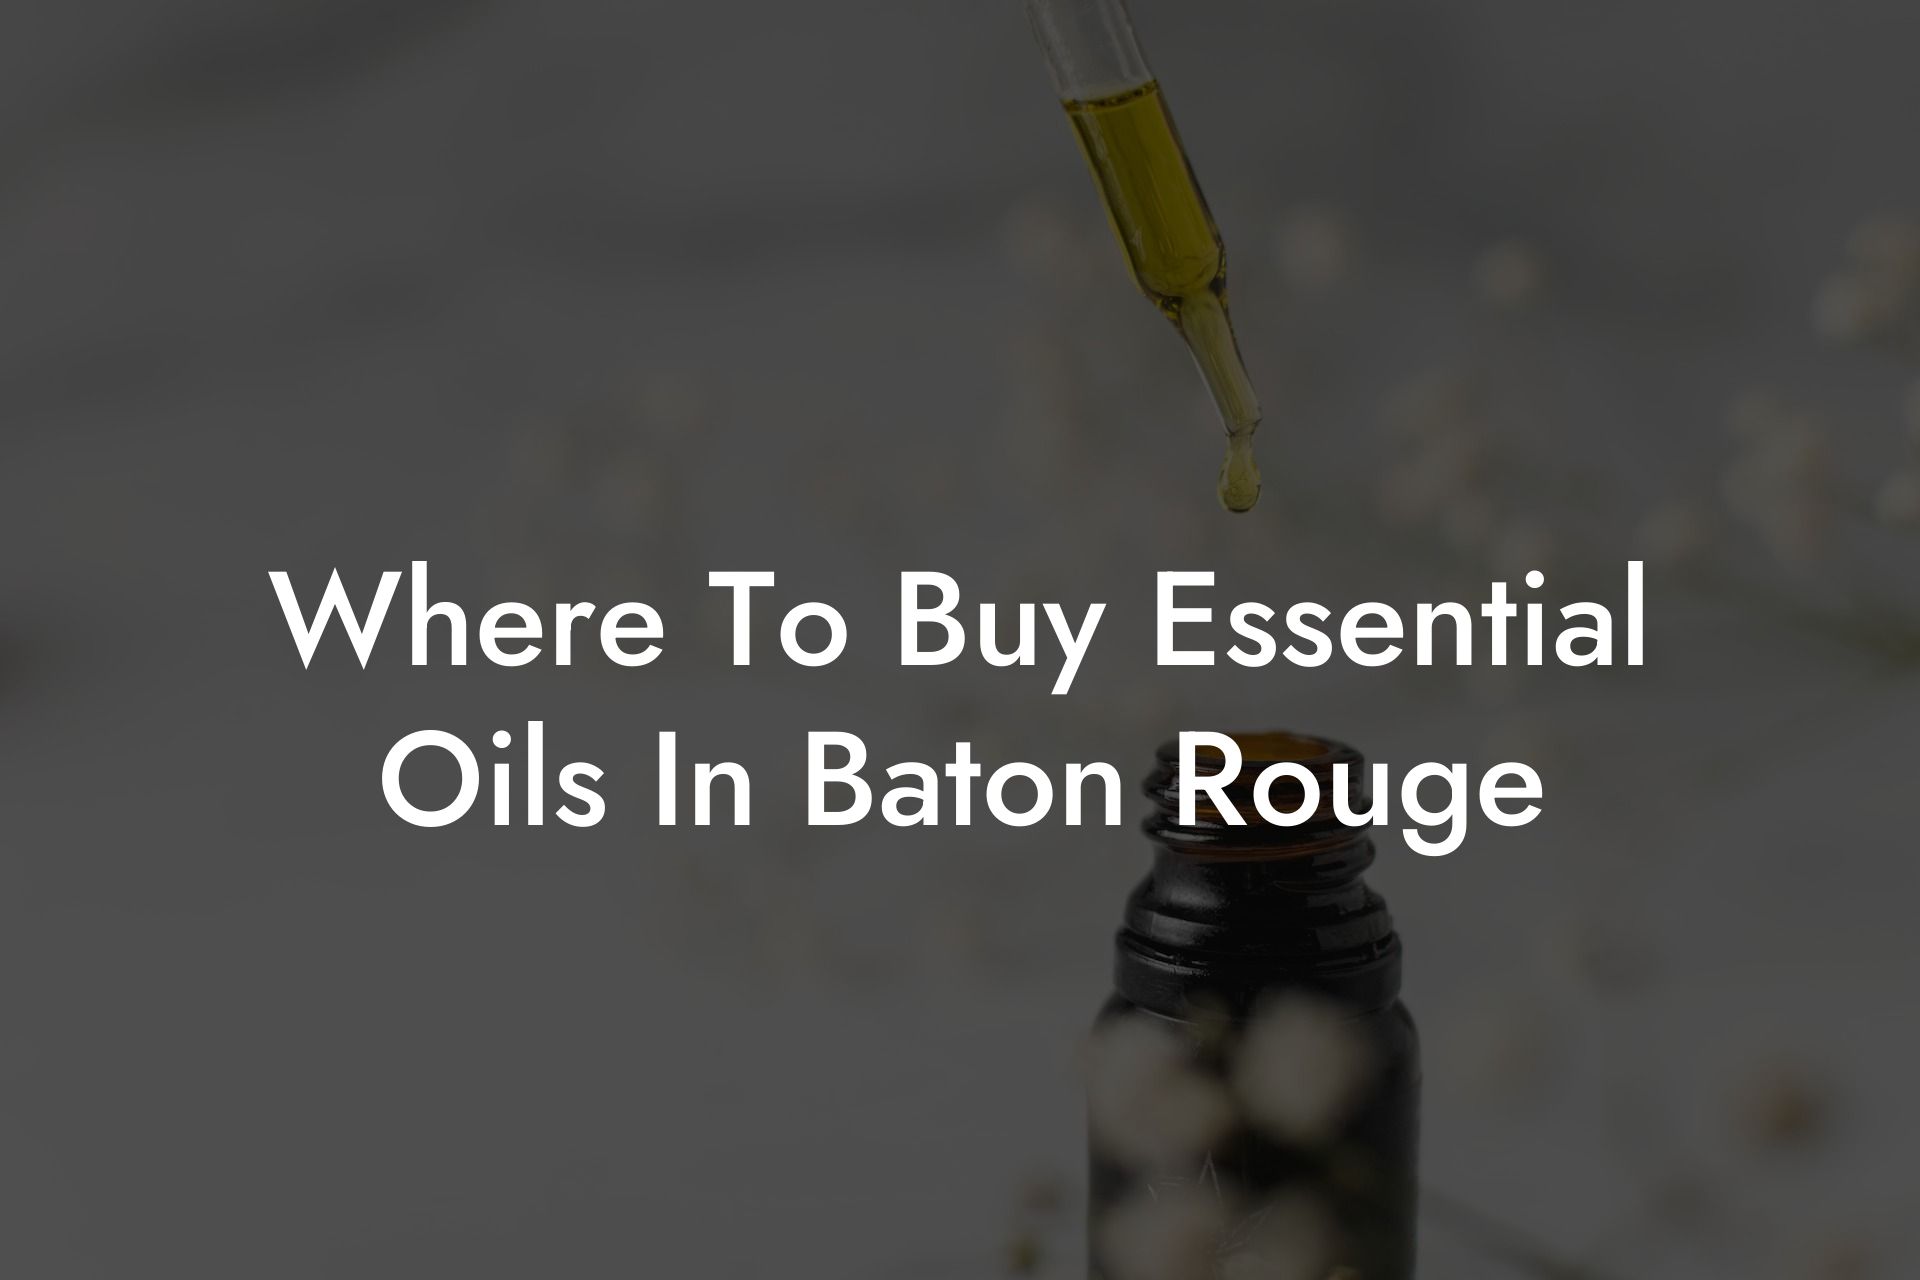 Where To Buy Essential Oils In Baton Rouge